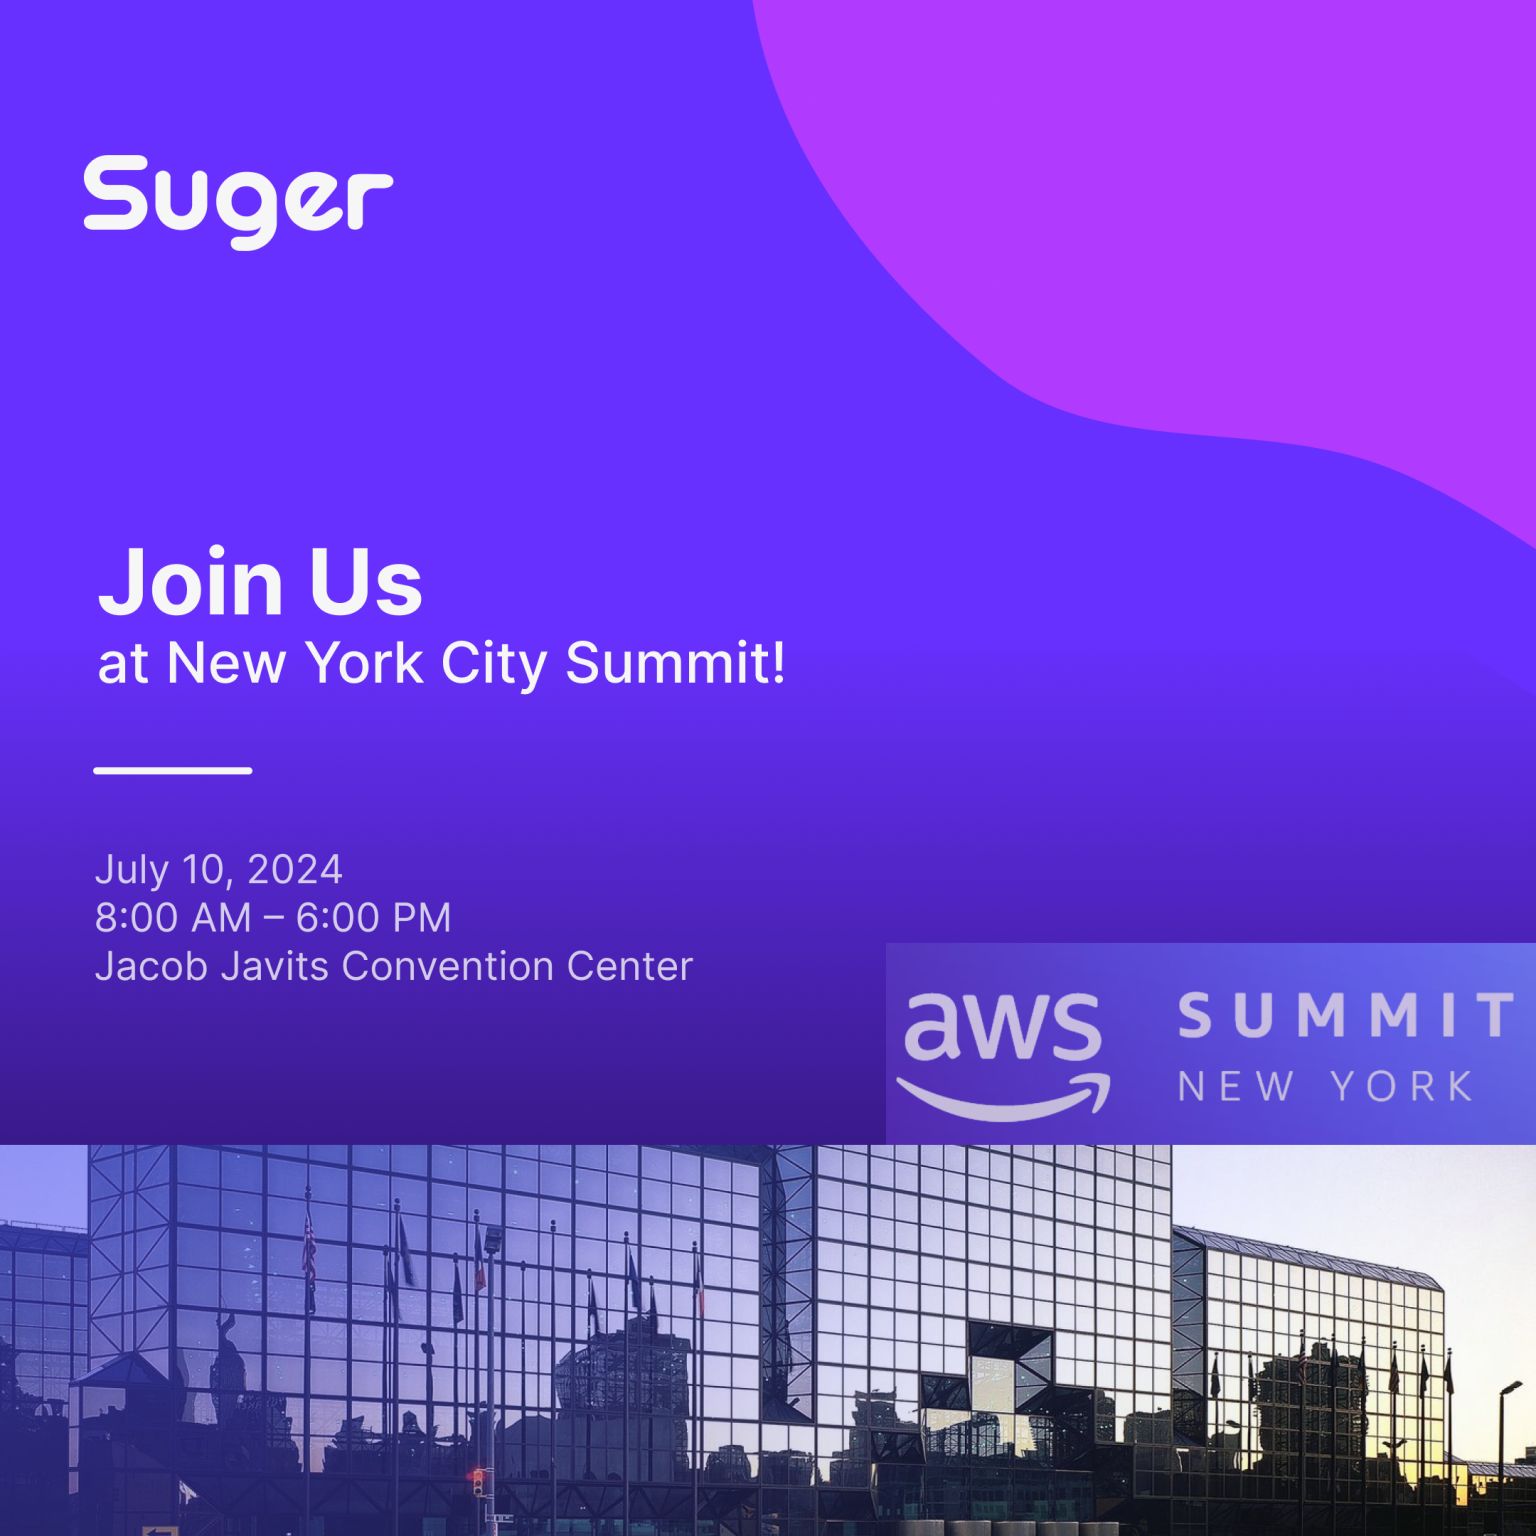 Meet Suger at the AWS Summit New York!